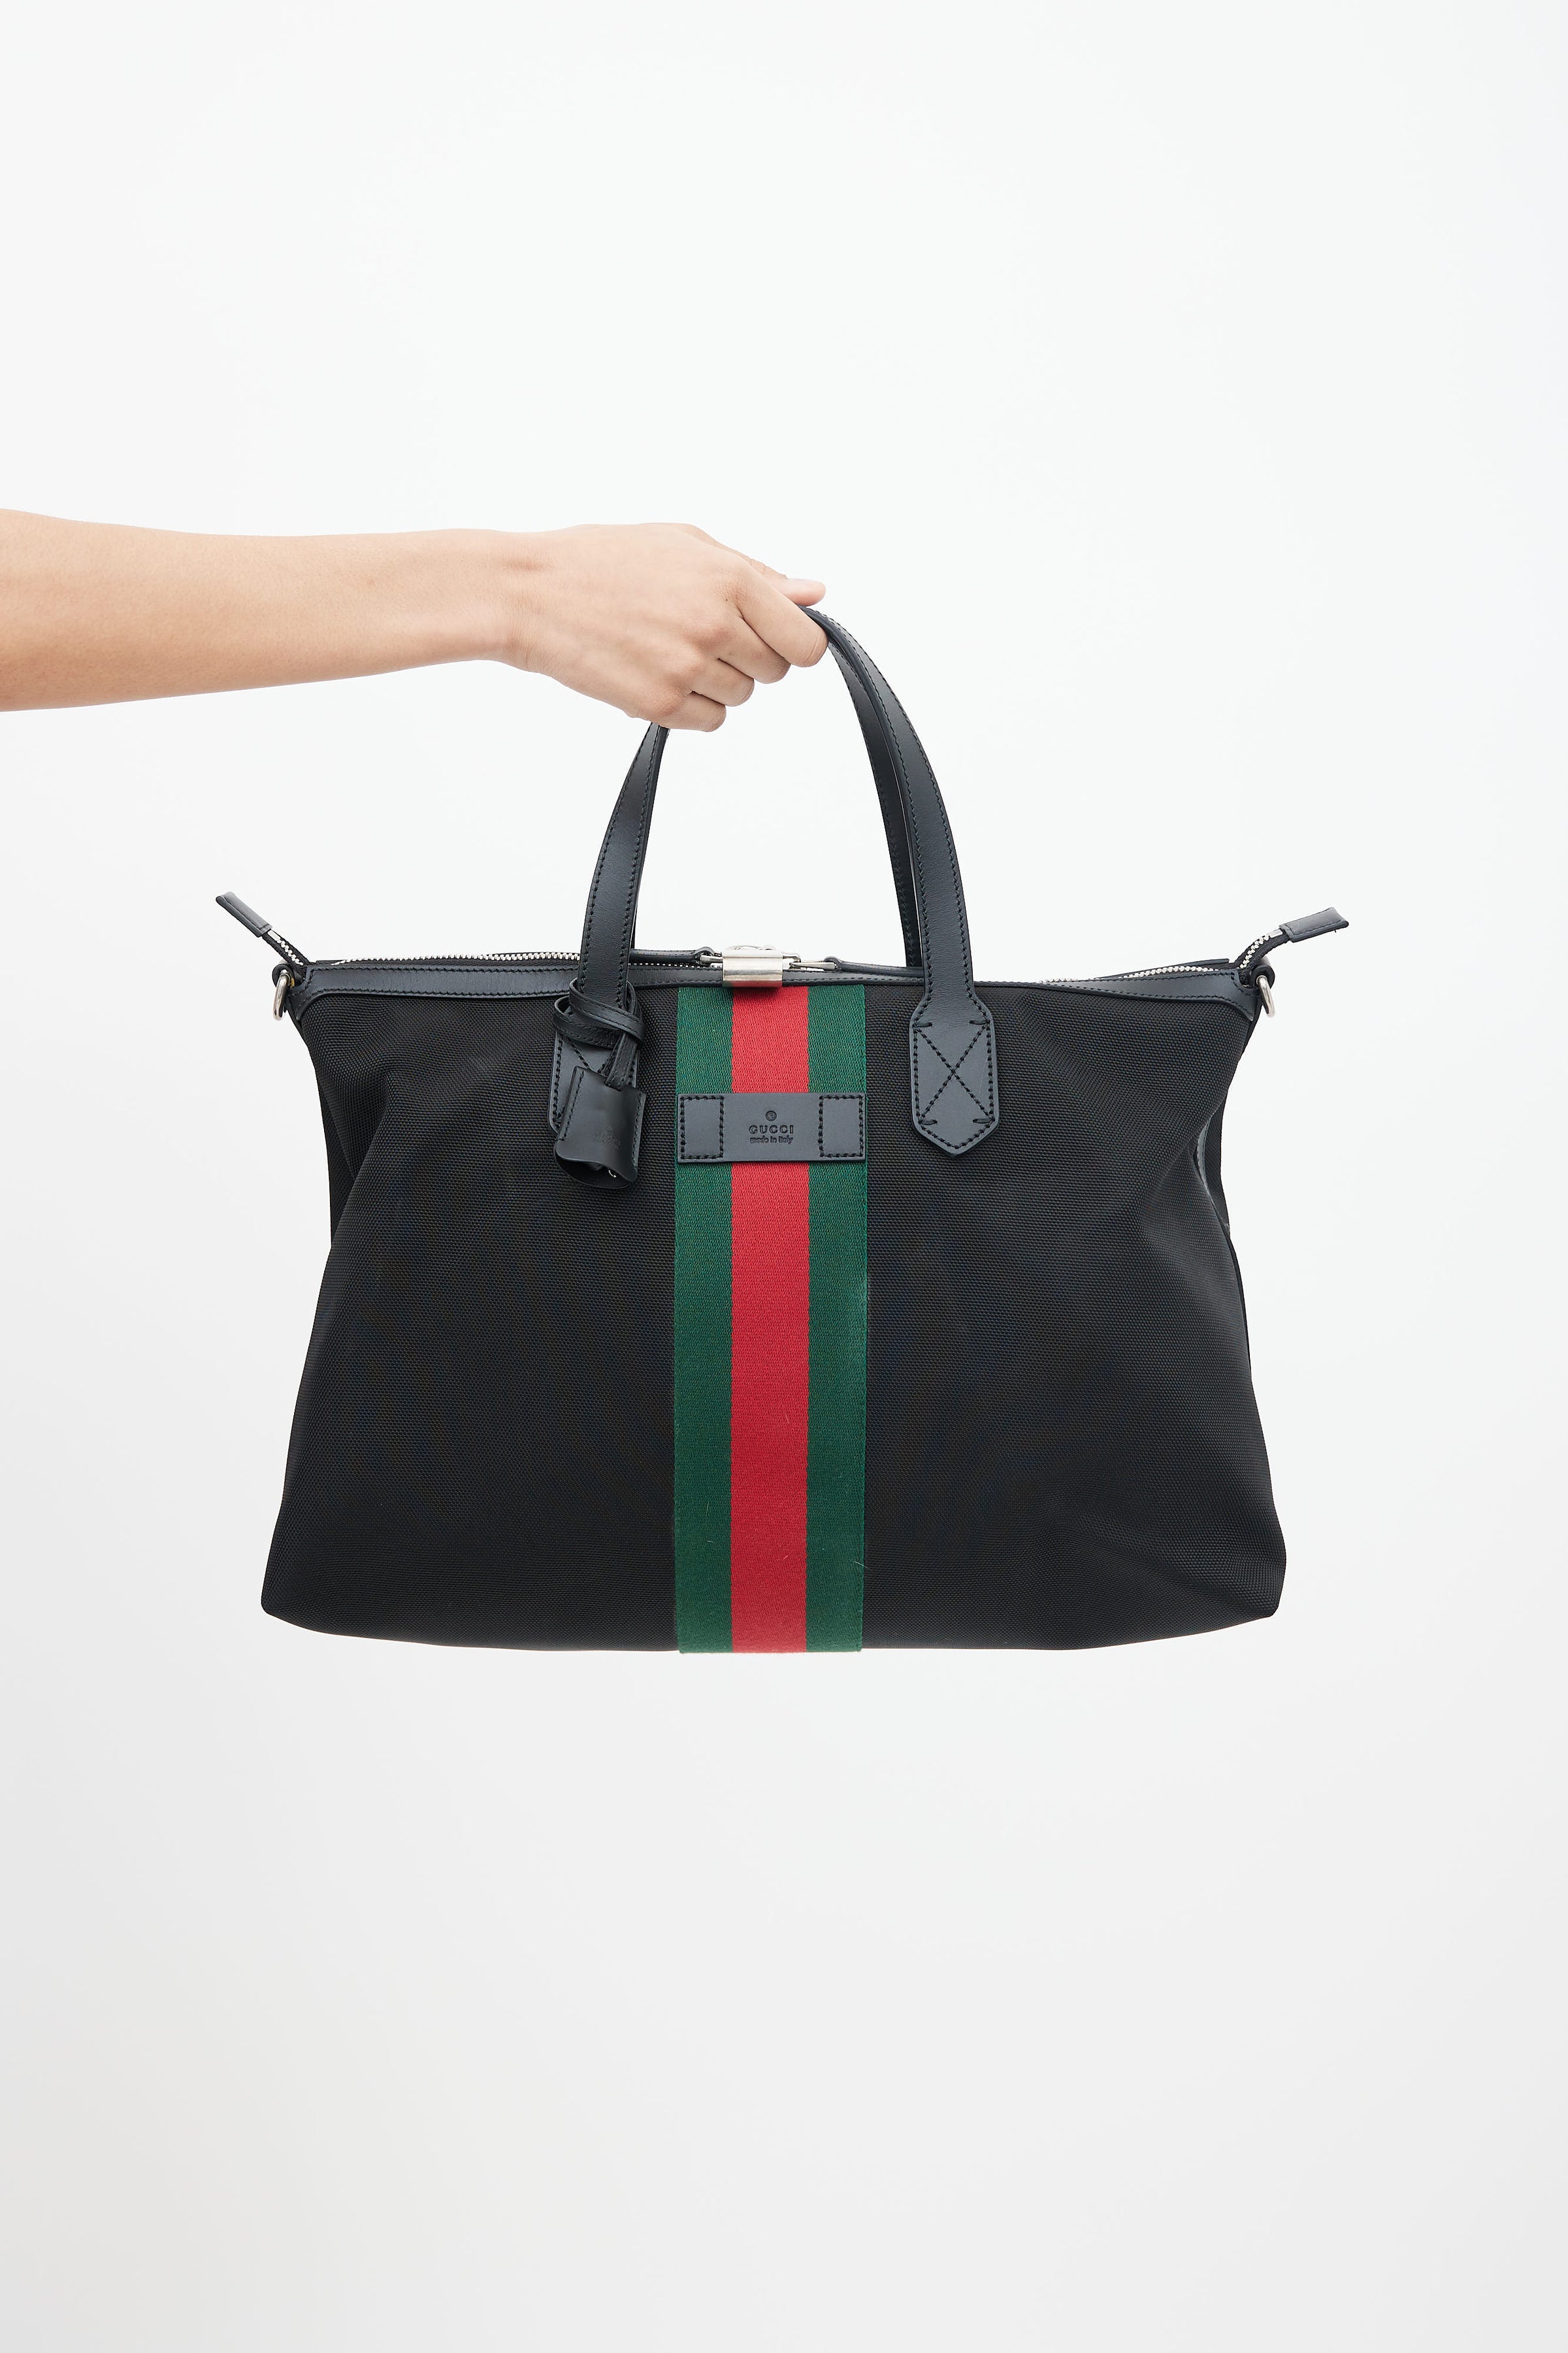 Gucci Pre-owned Women's Fabric Tote Bag - Black - One Size